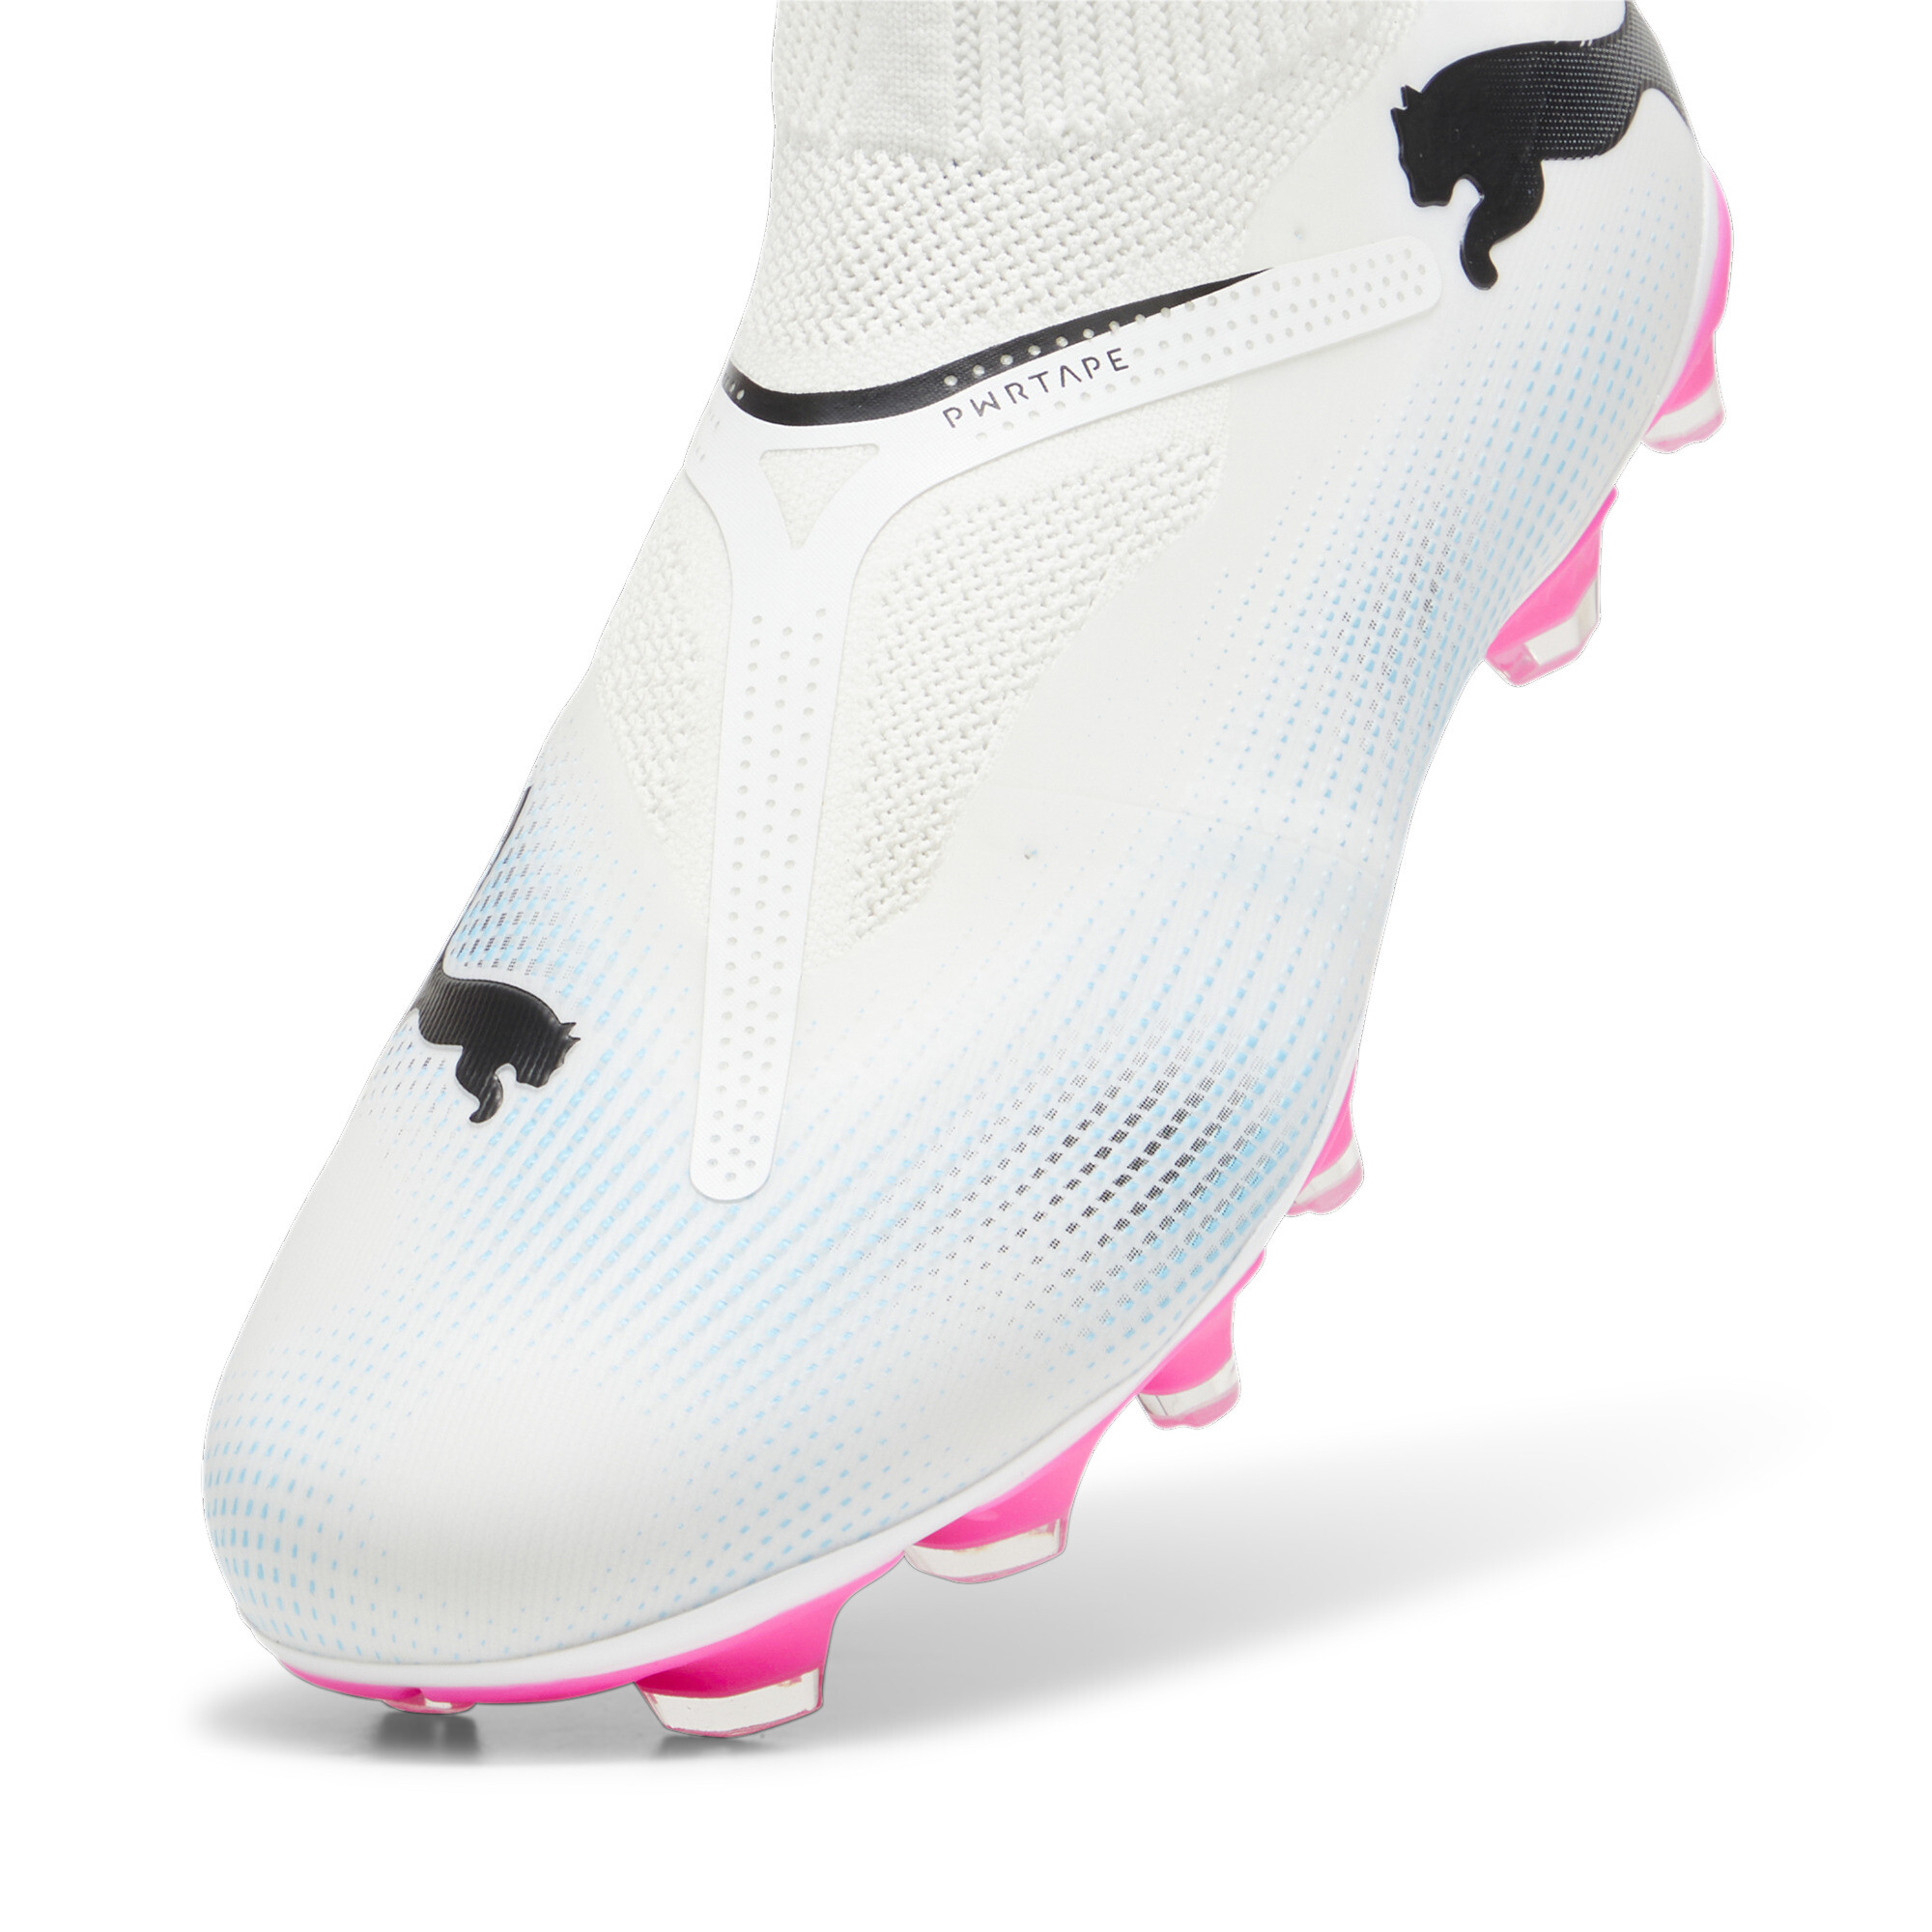 Men's PUMA FUTURE 7 MATCH FG/AG Laceless Football Boots In White/Pink, Size EU 42